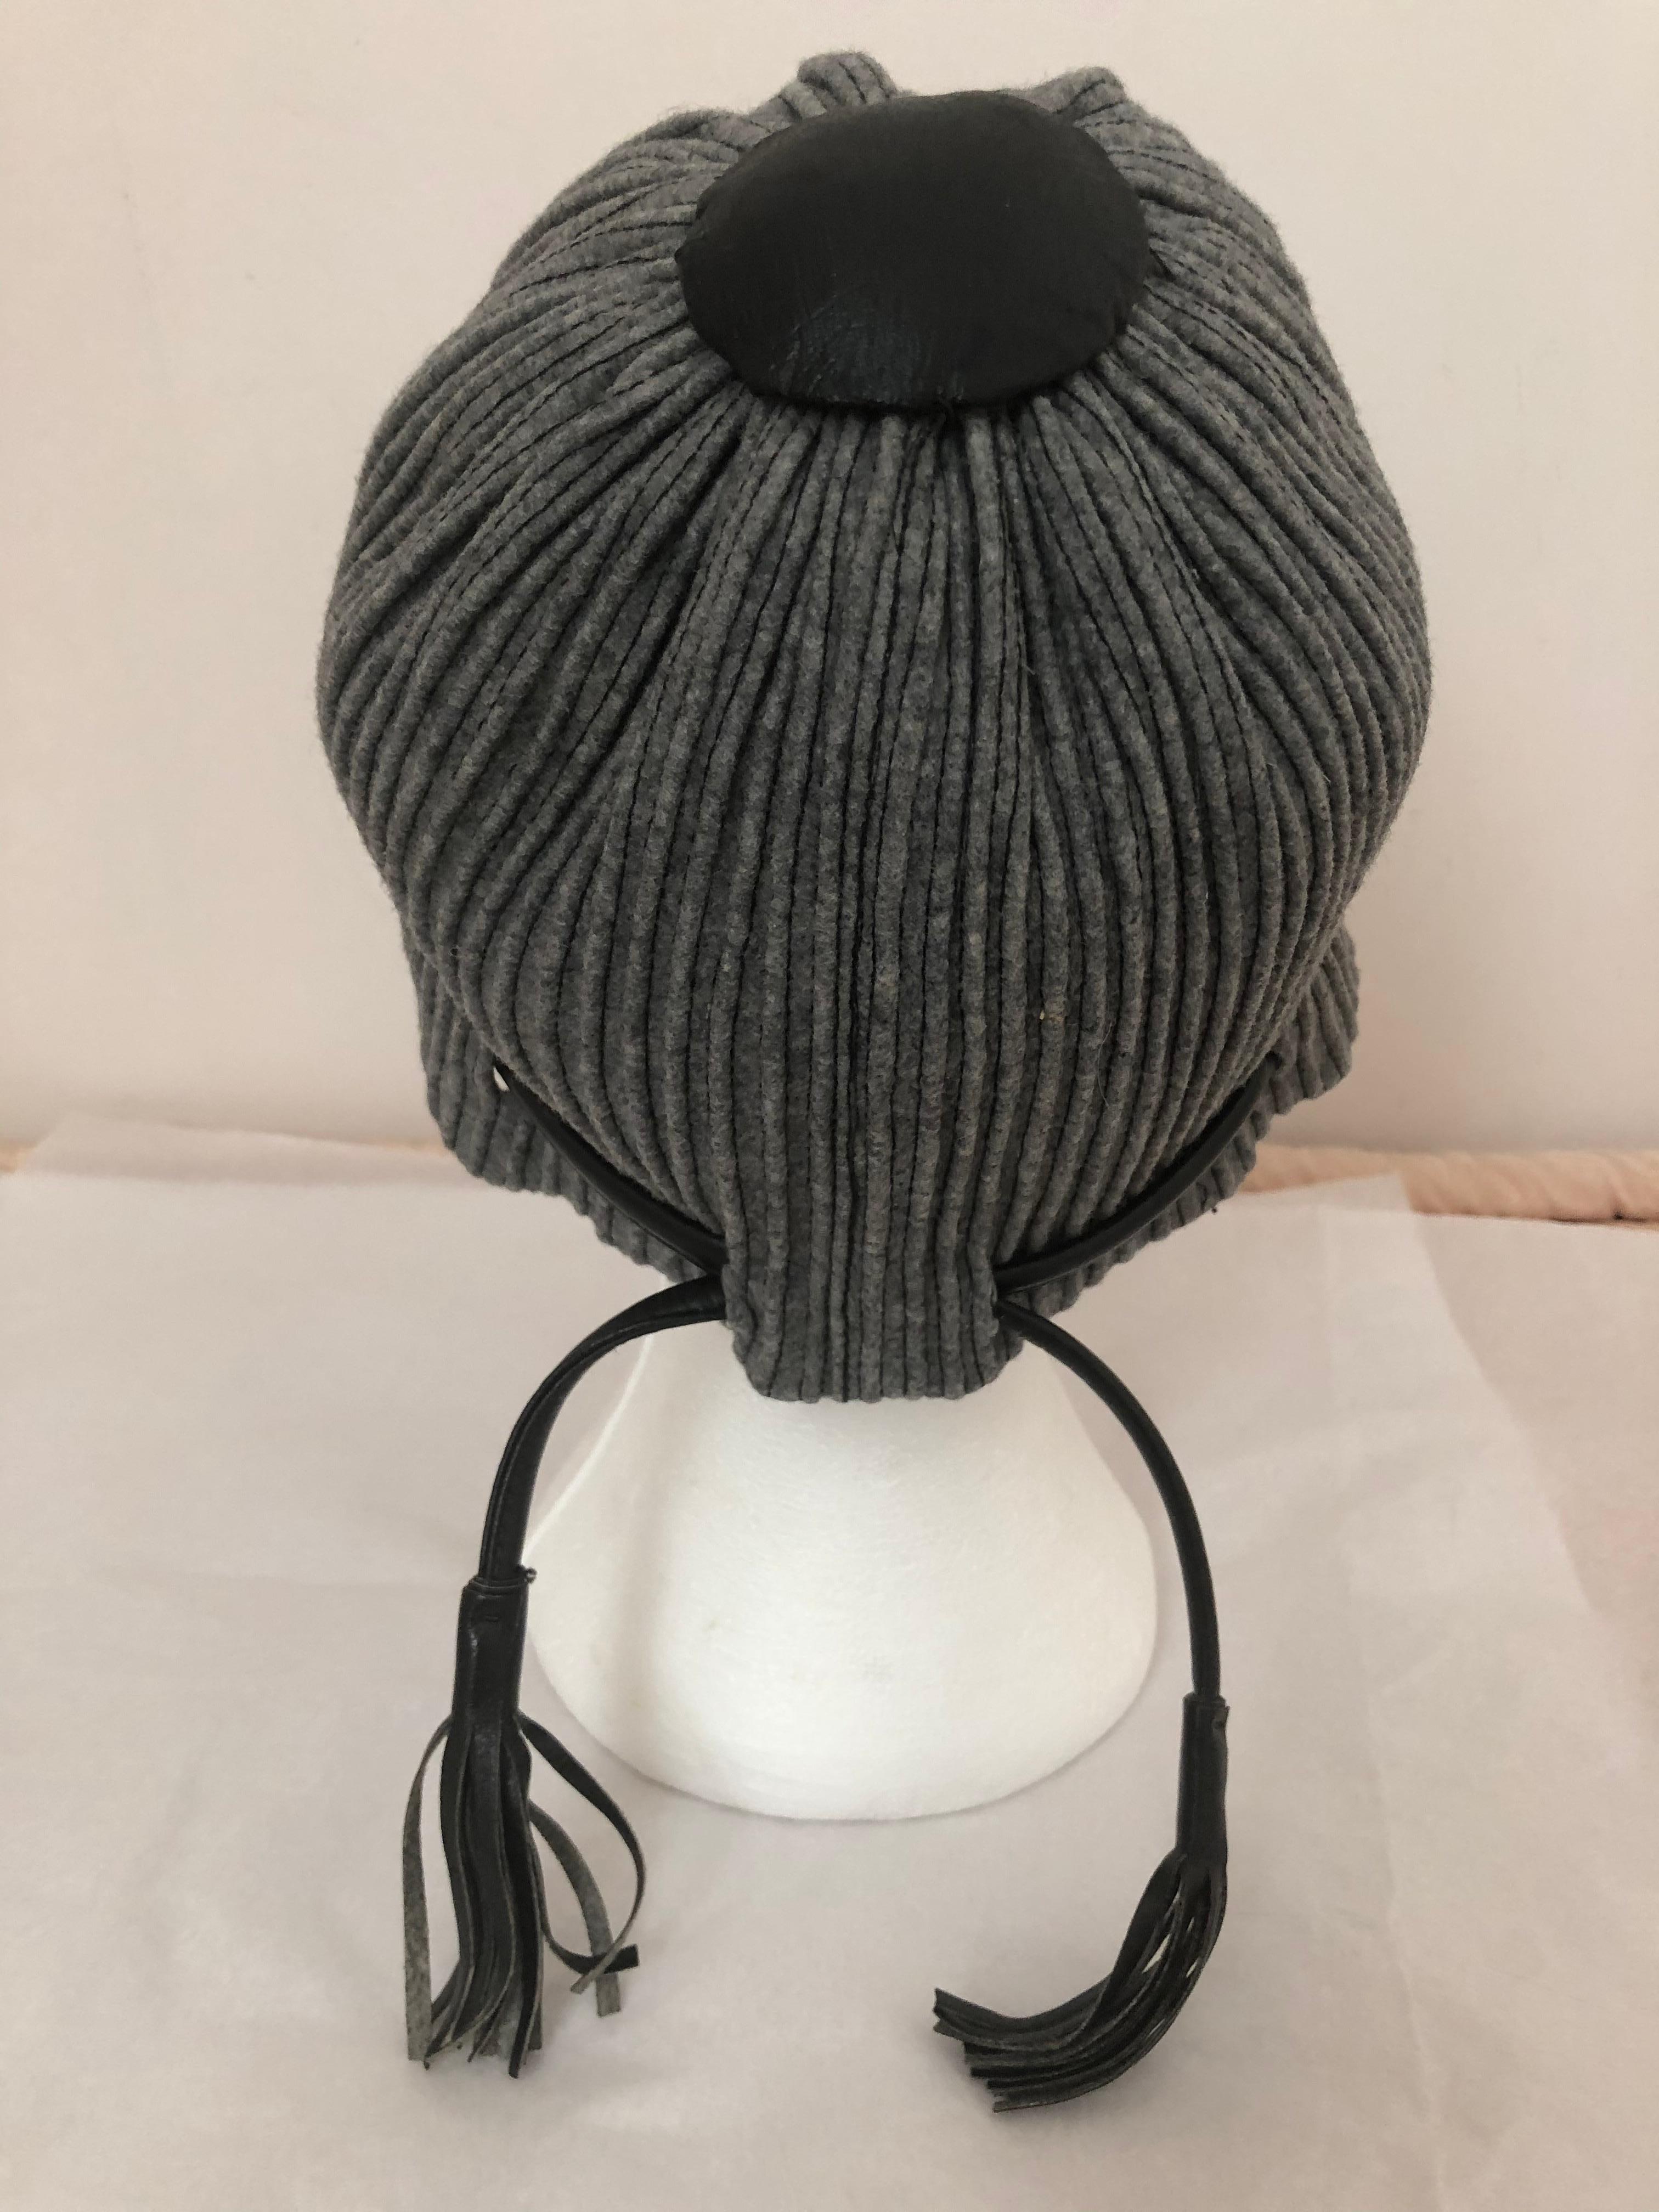 This is a very unique hat from Elsa Schiaparelli, both in style and material. It is made of grey  wool stitched raised ribbing, and black leather lacing ending in tassels. It also has a black leather disc at the top, with gros grain patch on the